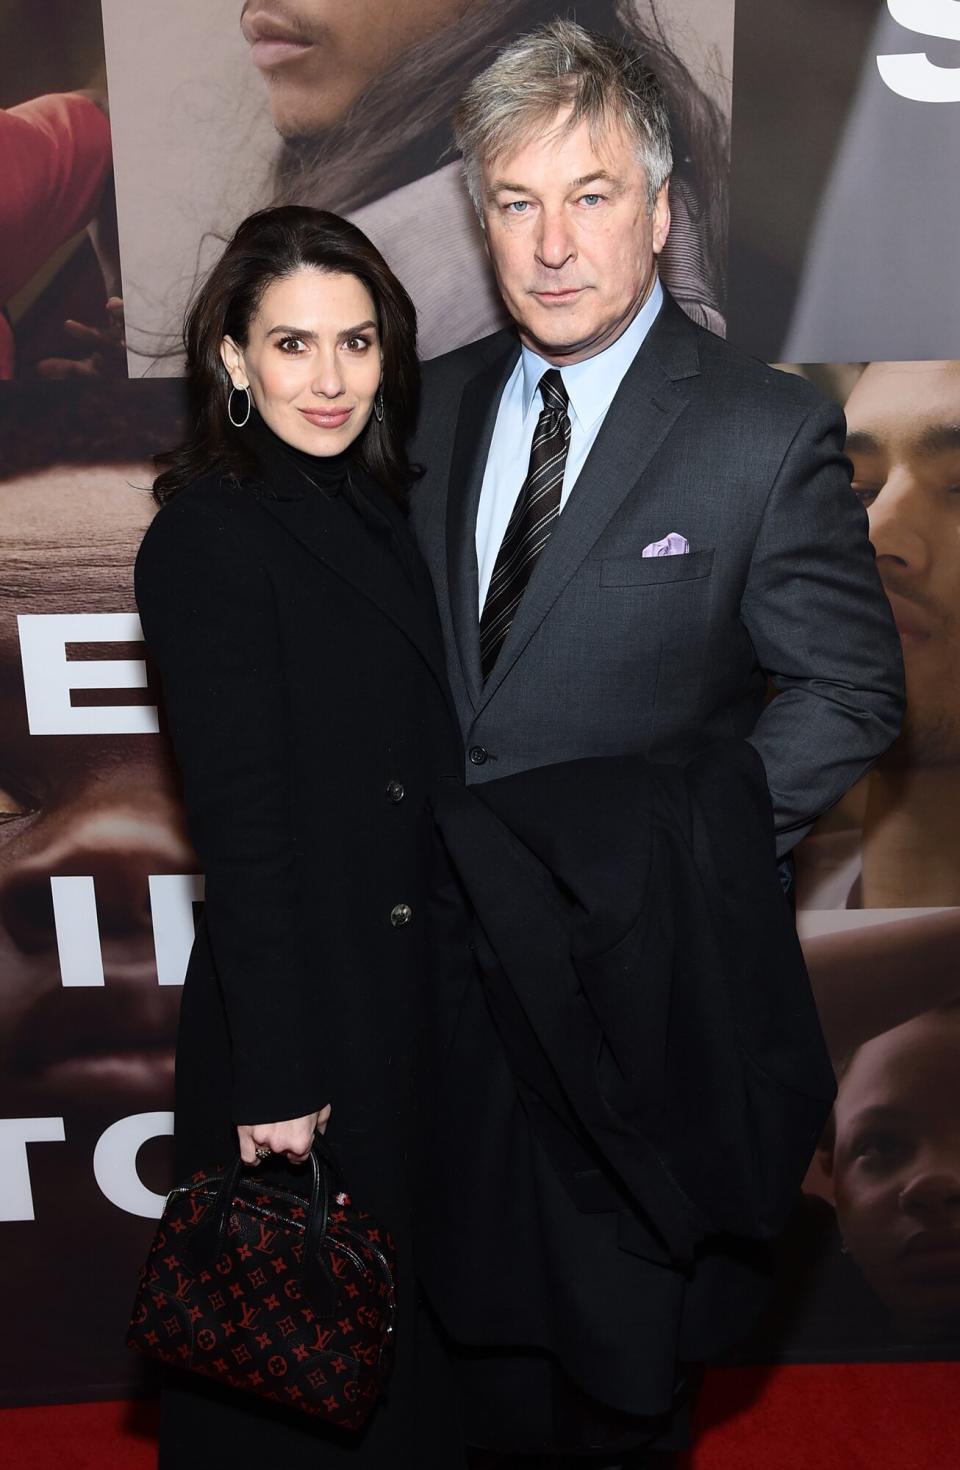 Hilaria Baldwin and Alec Baldwin attend the opening night of "West Side Story" at Broadway Theatre on February 20, 2020 in New York City